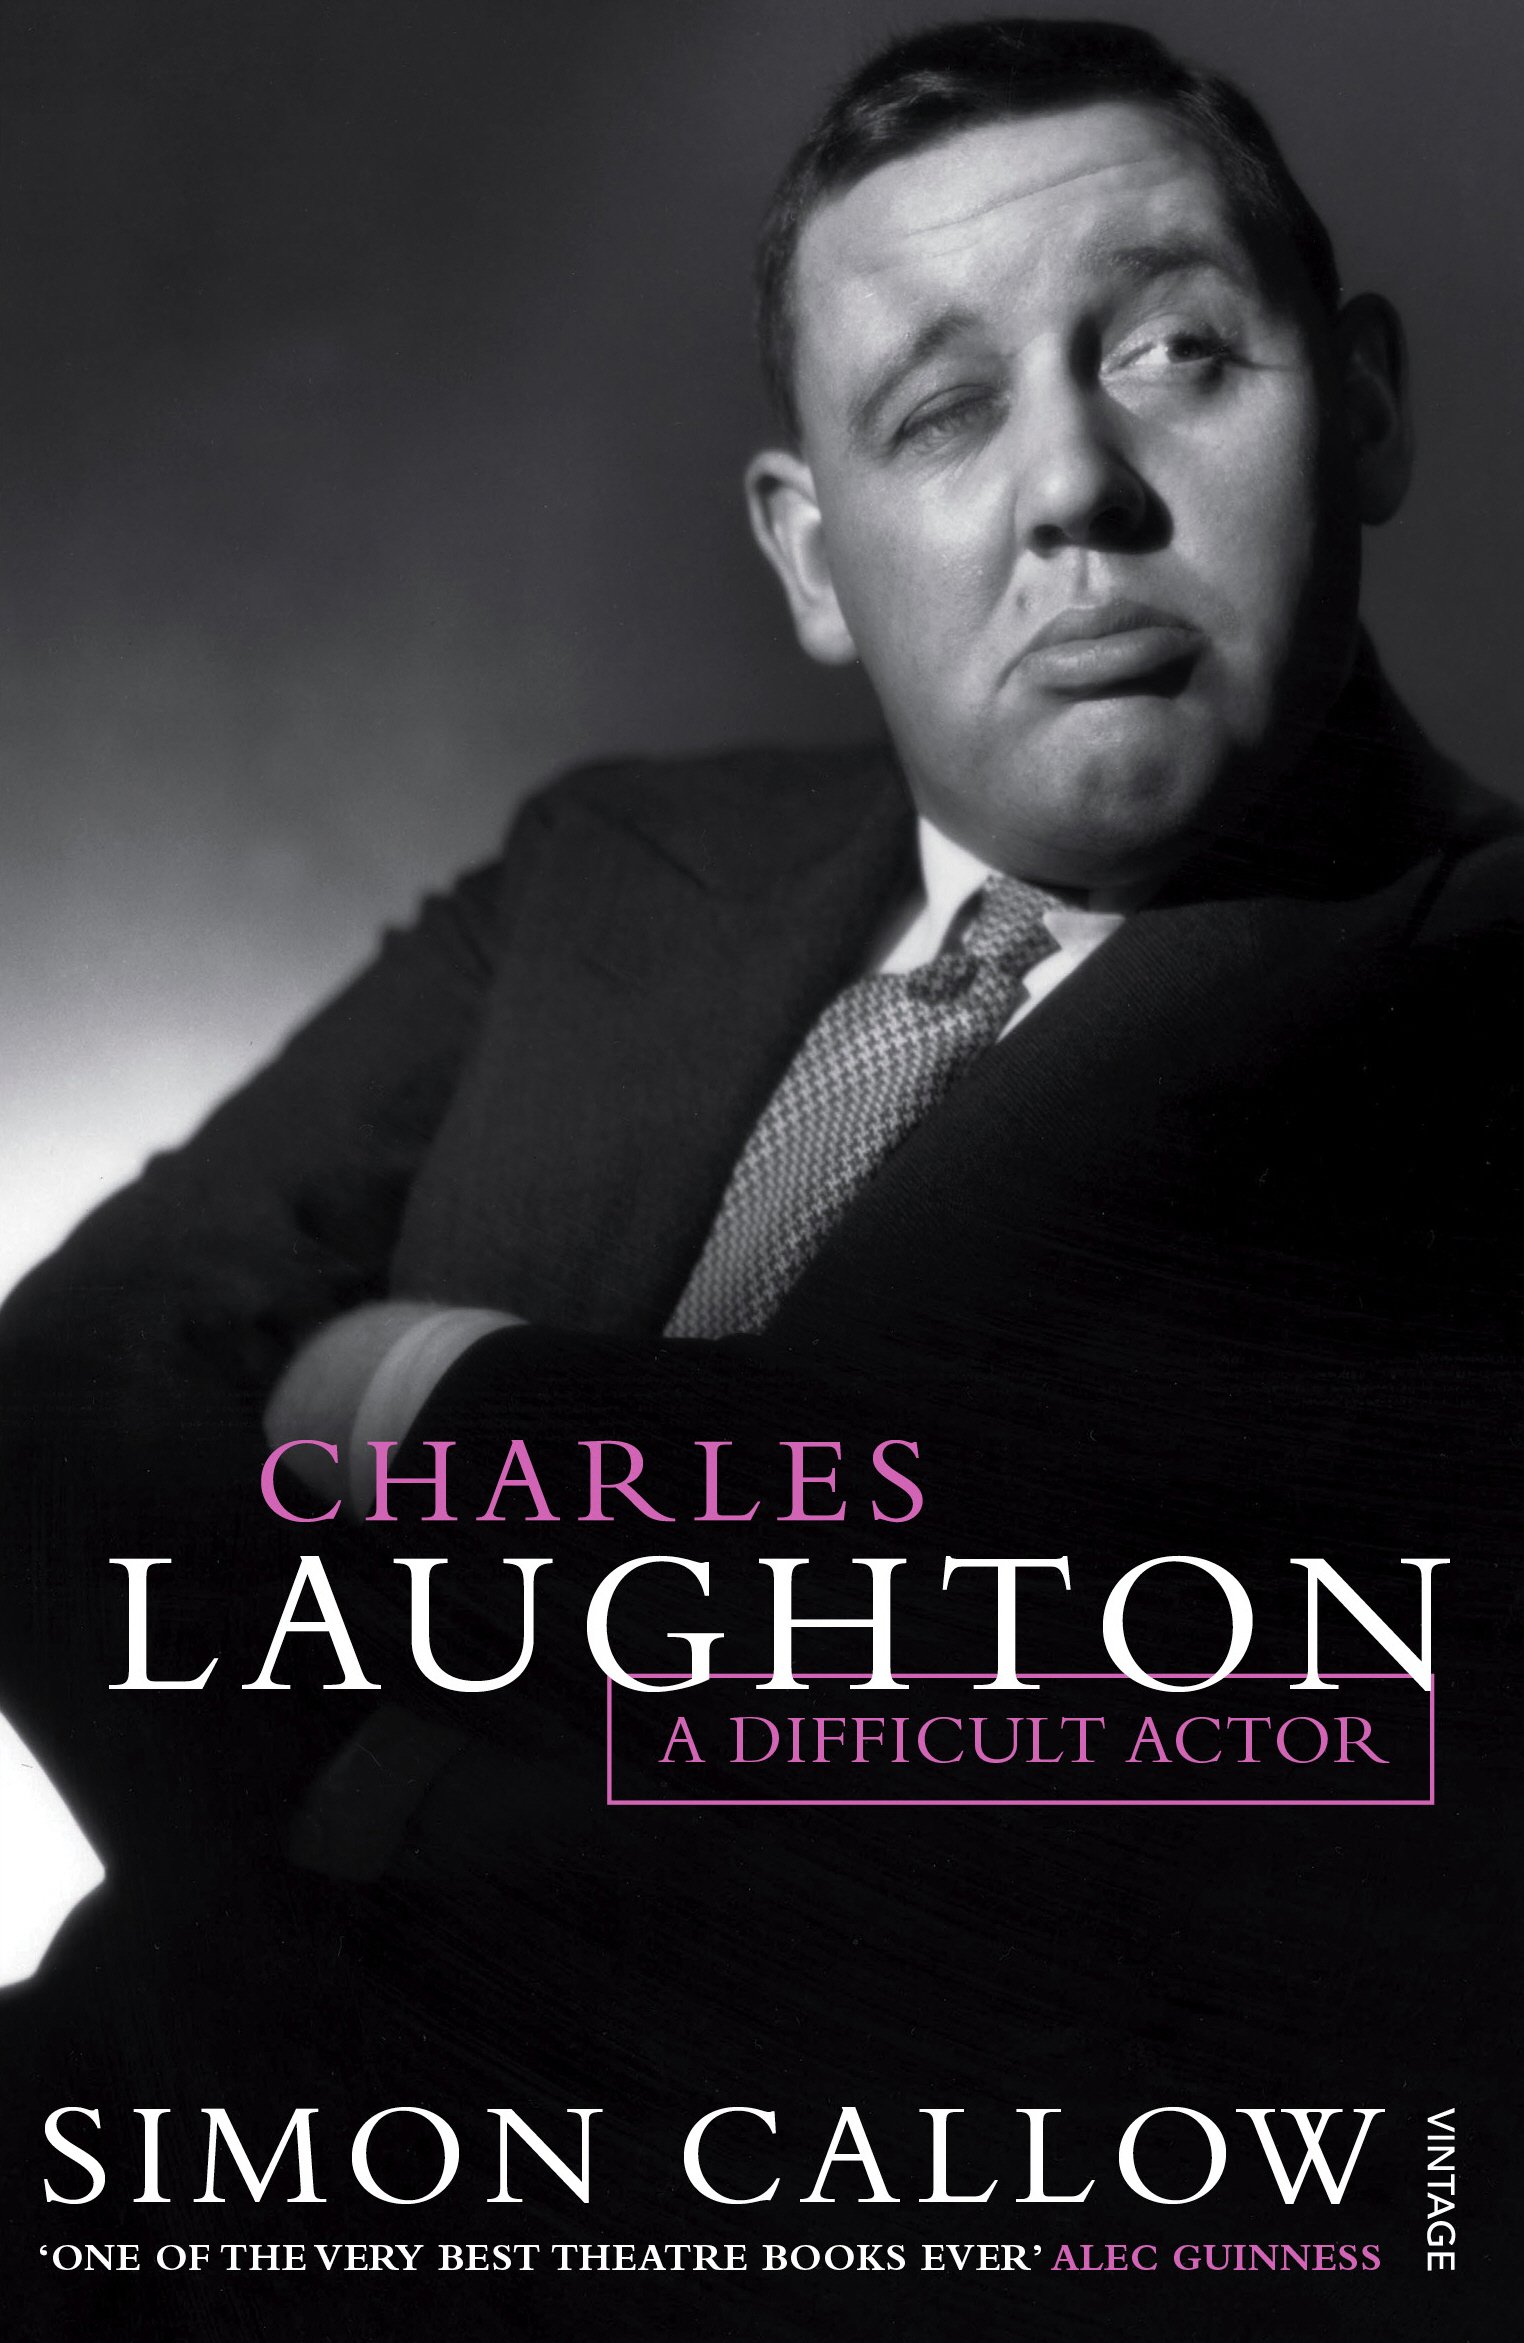 Charles Laughton: A Difficult Actor by Simon Callow.